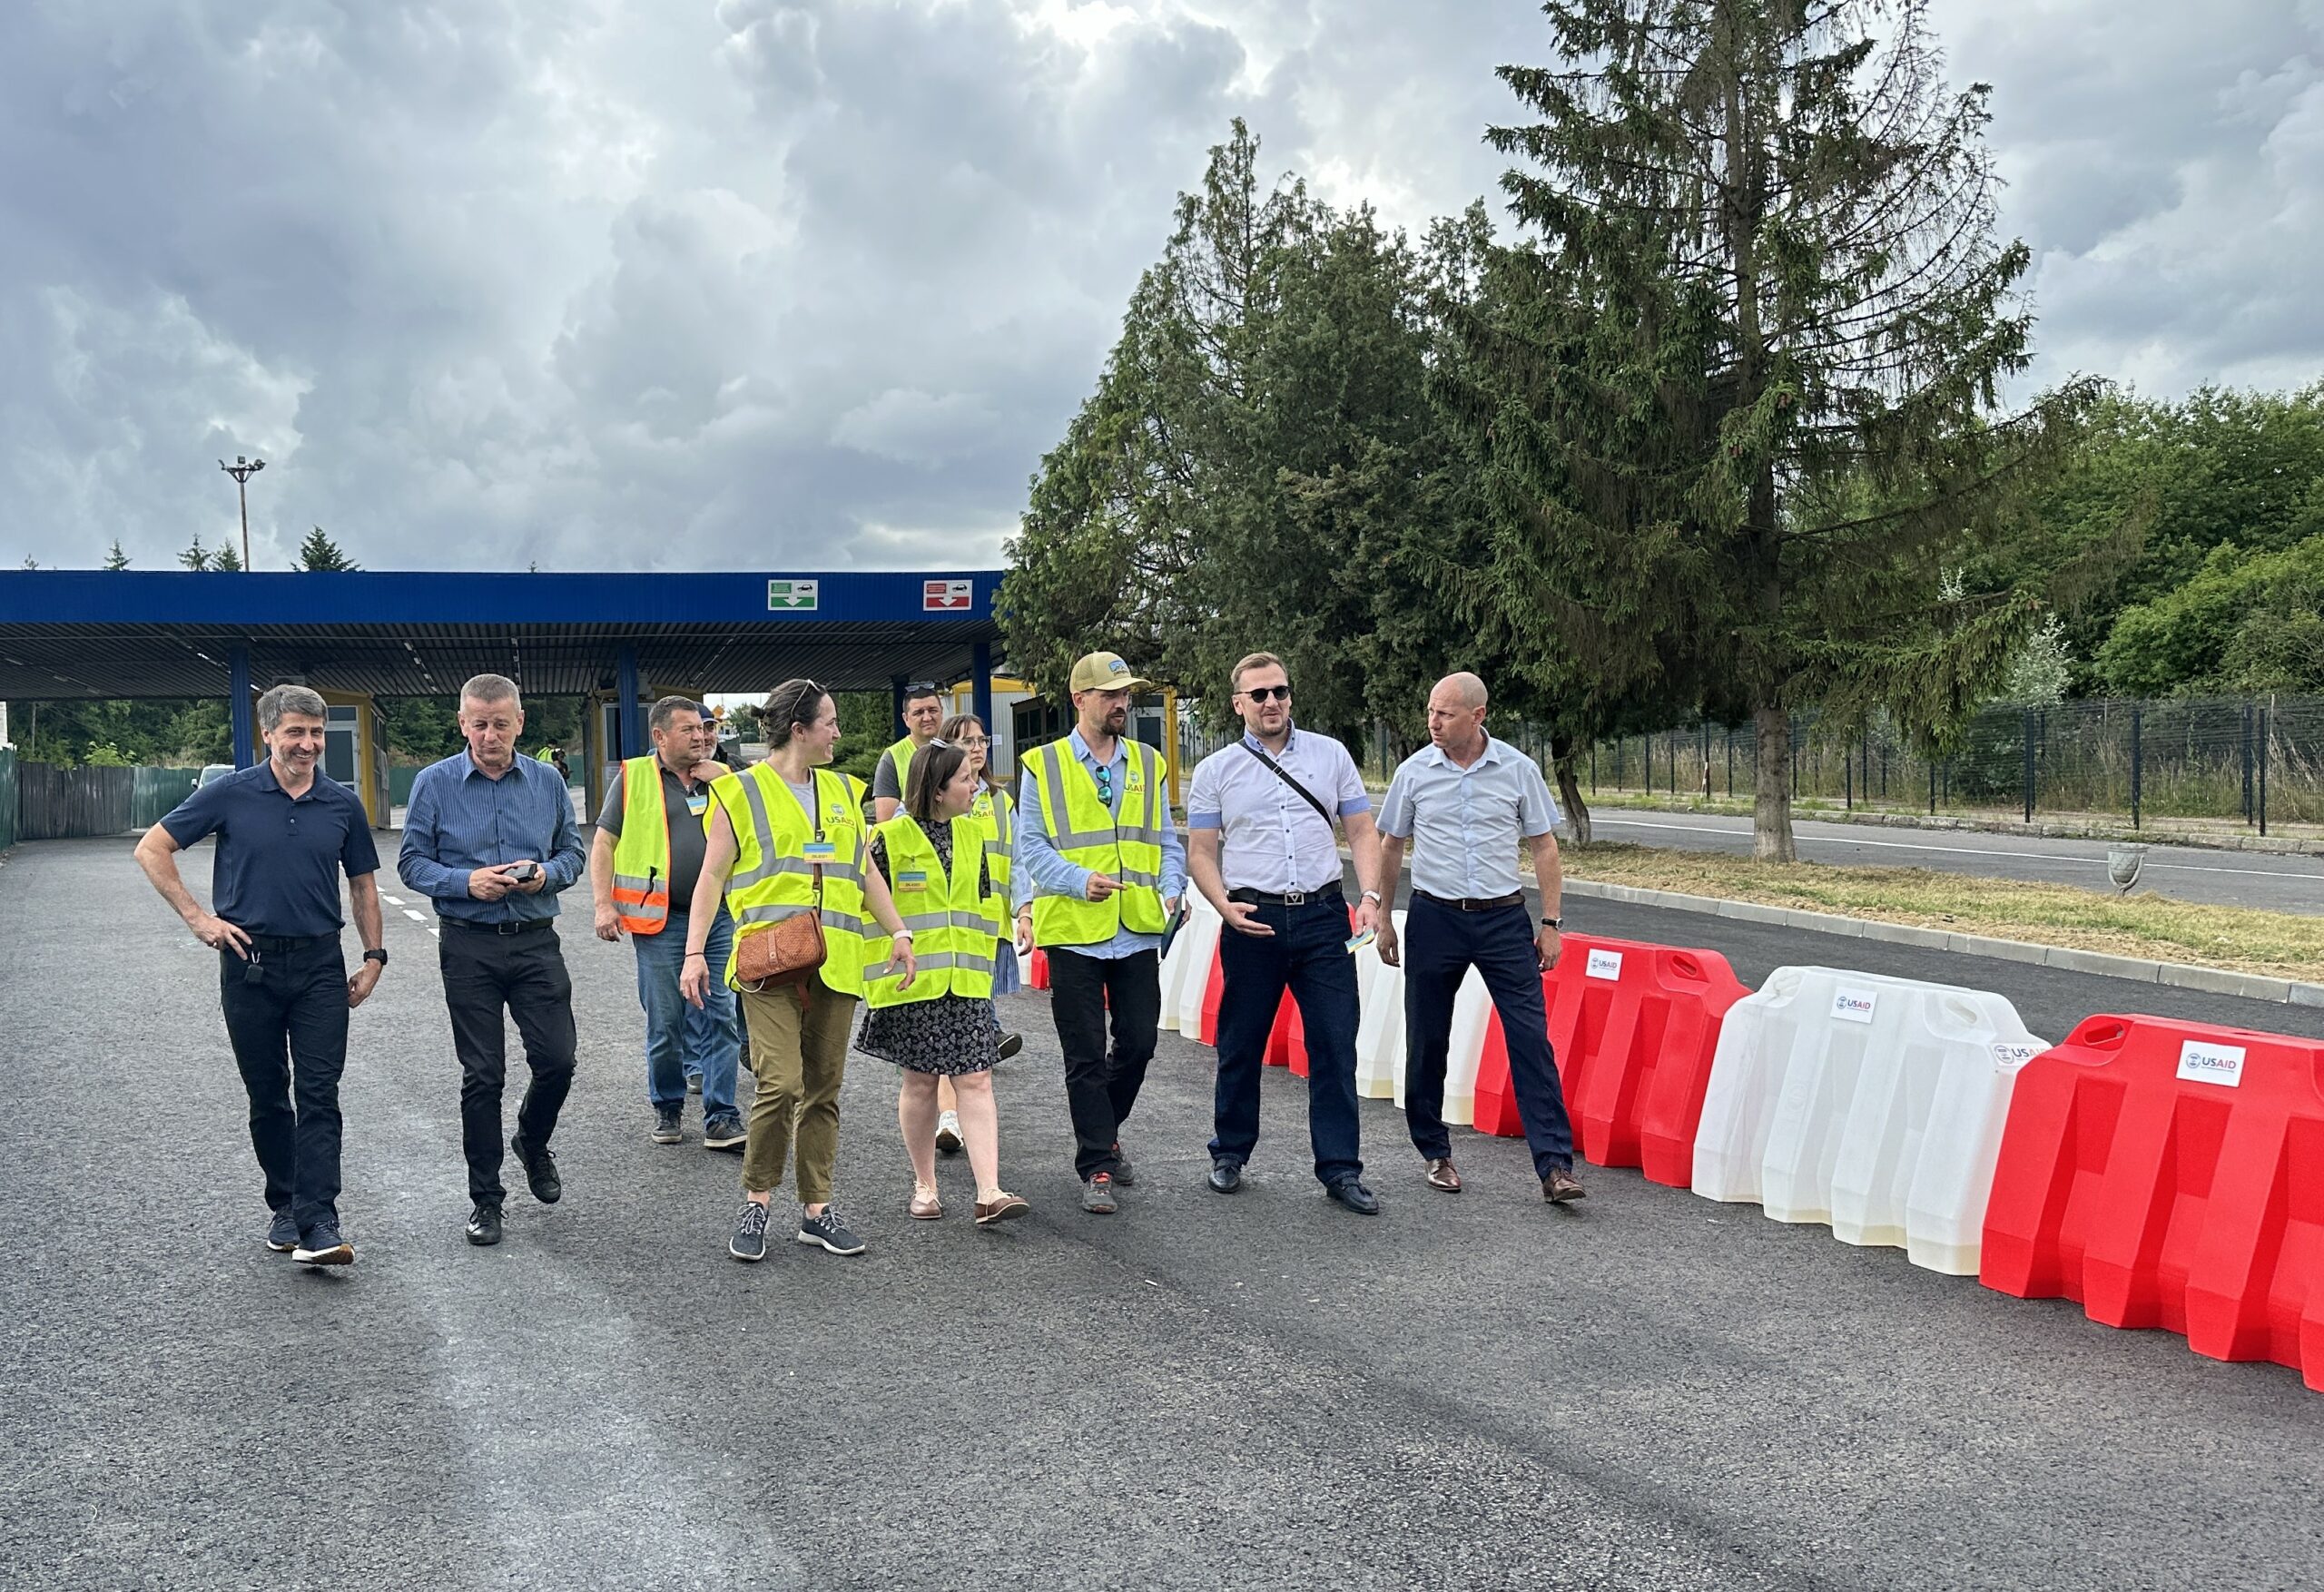 A modernized border crossing point on the border with Slovakia was opened in Zakarpattia Oblast